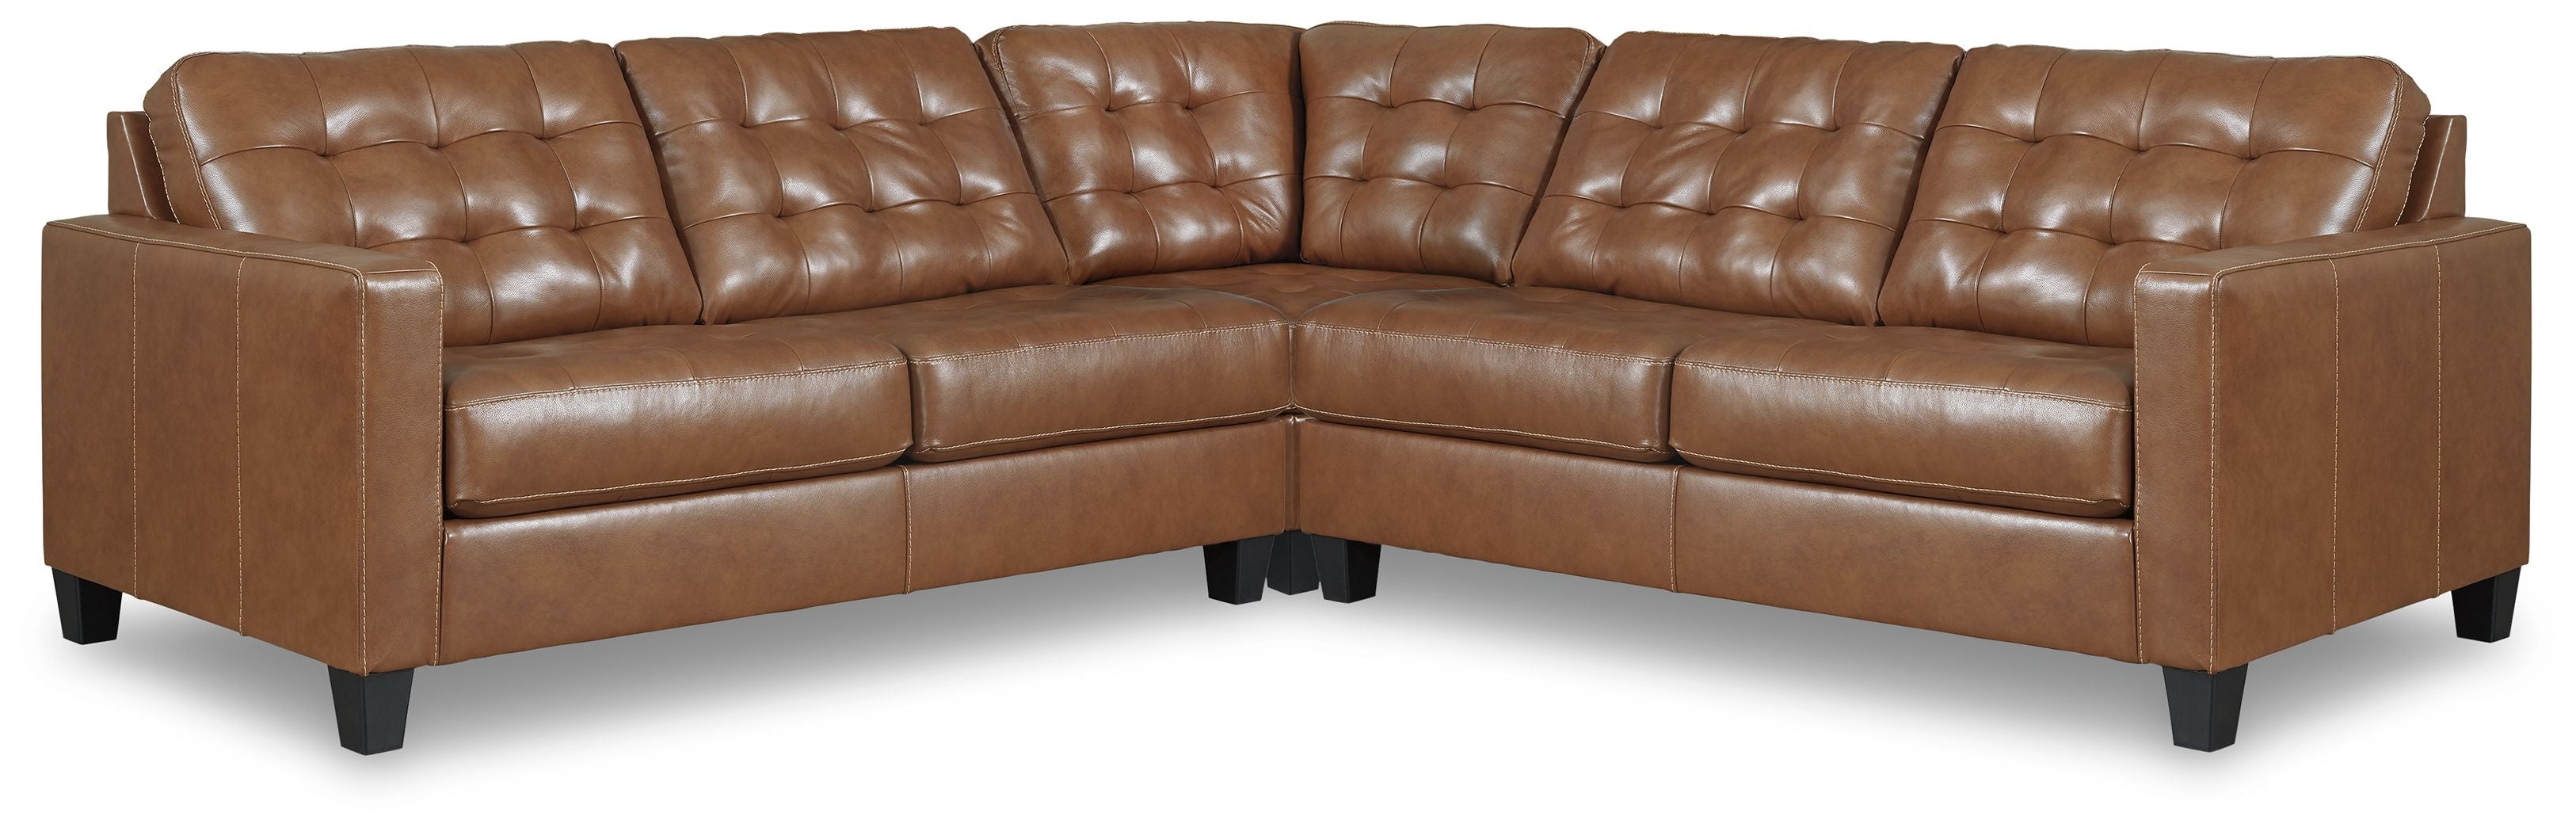 baskove leather sectional